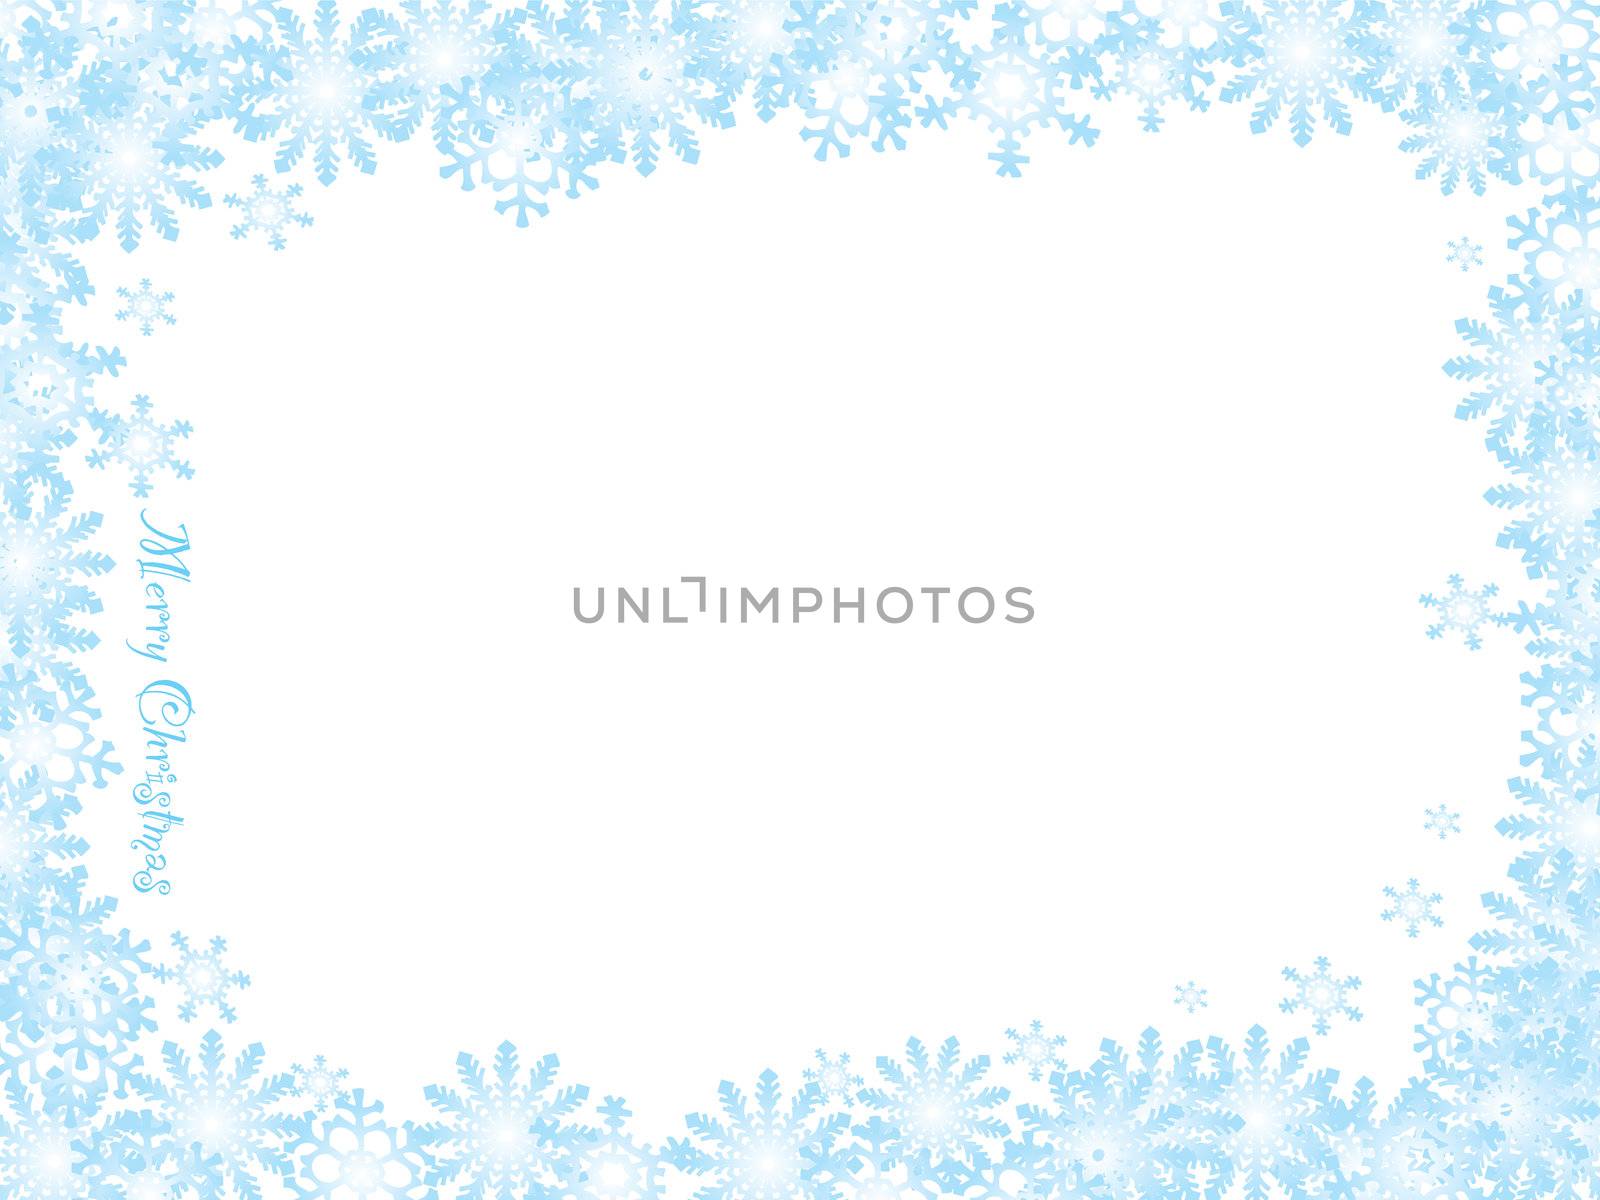 Christmas inspired snow flake background with blue ice frame